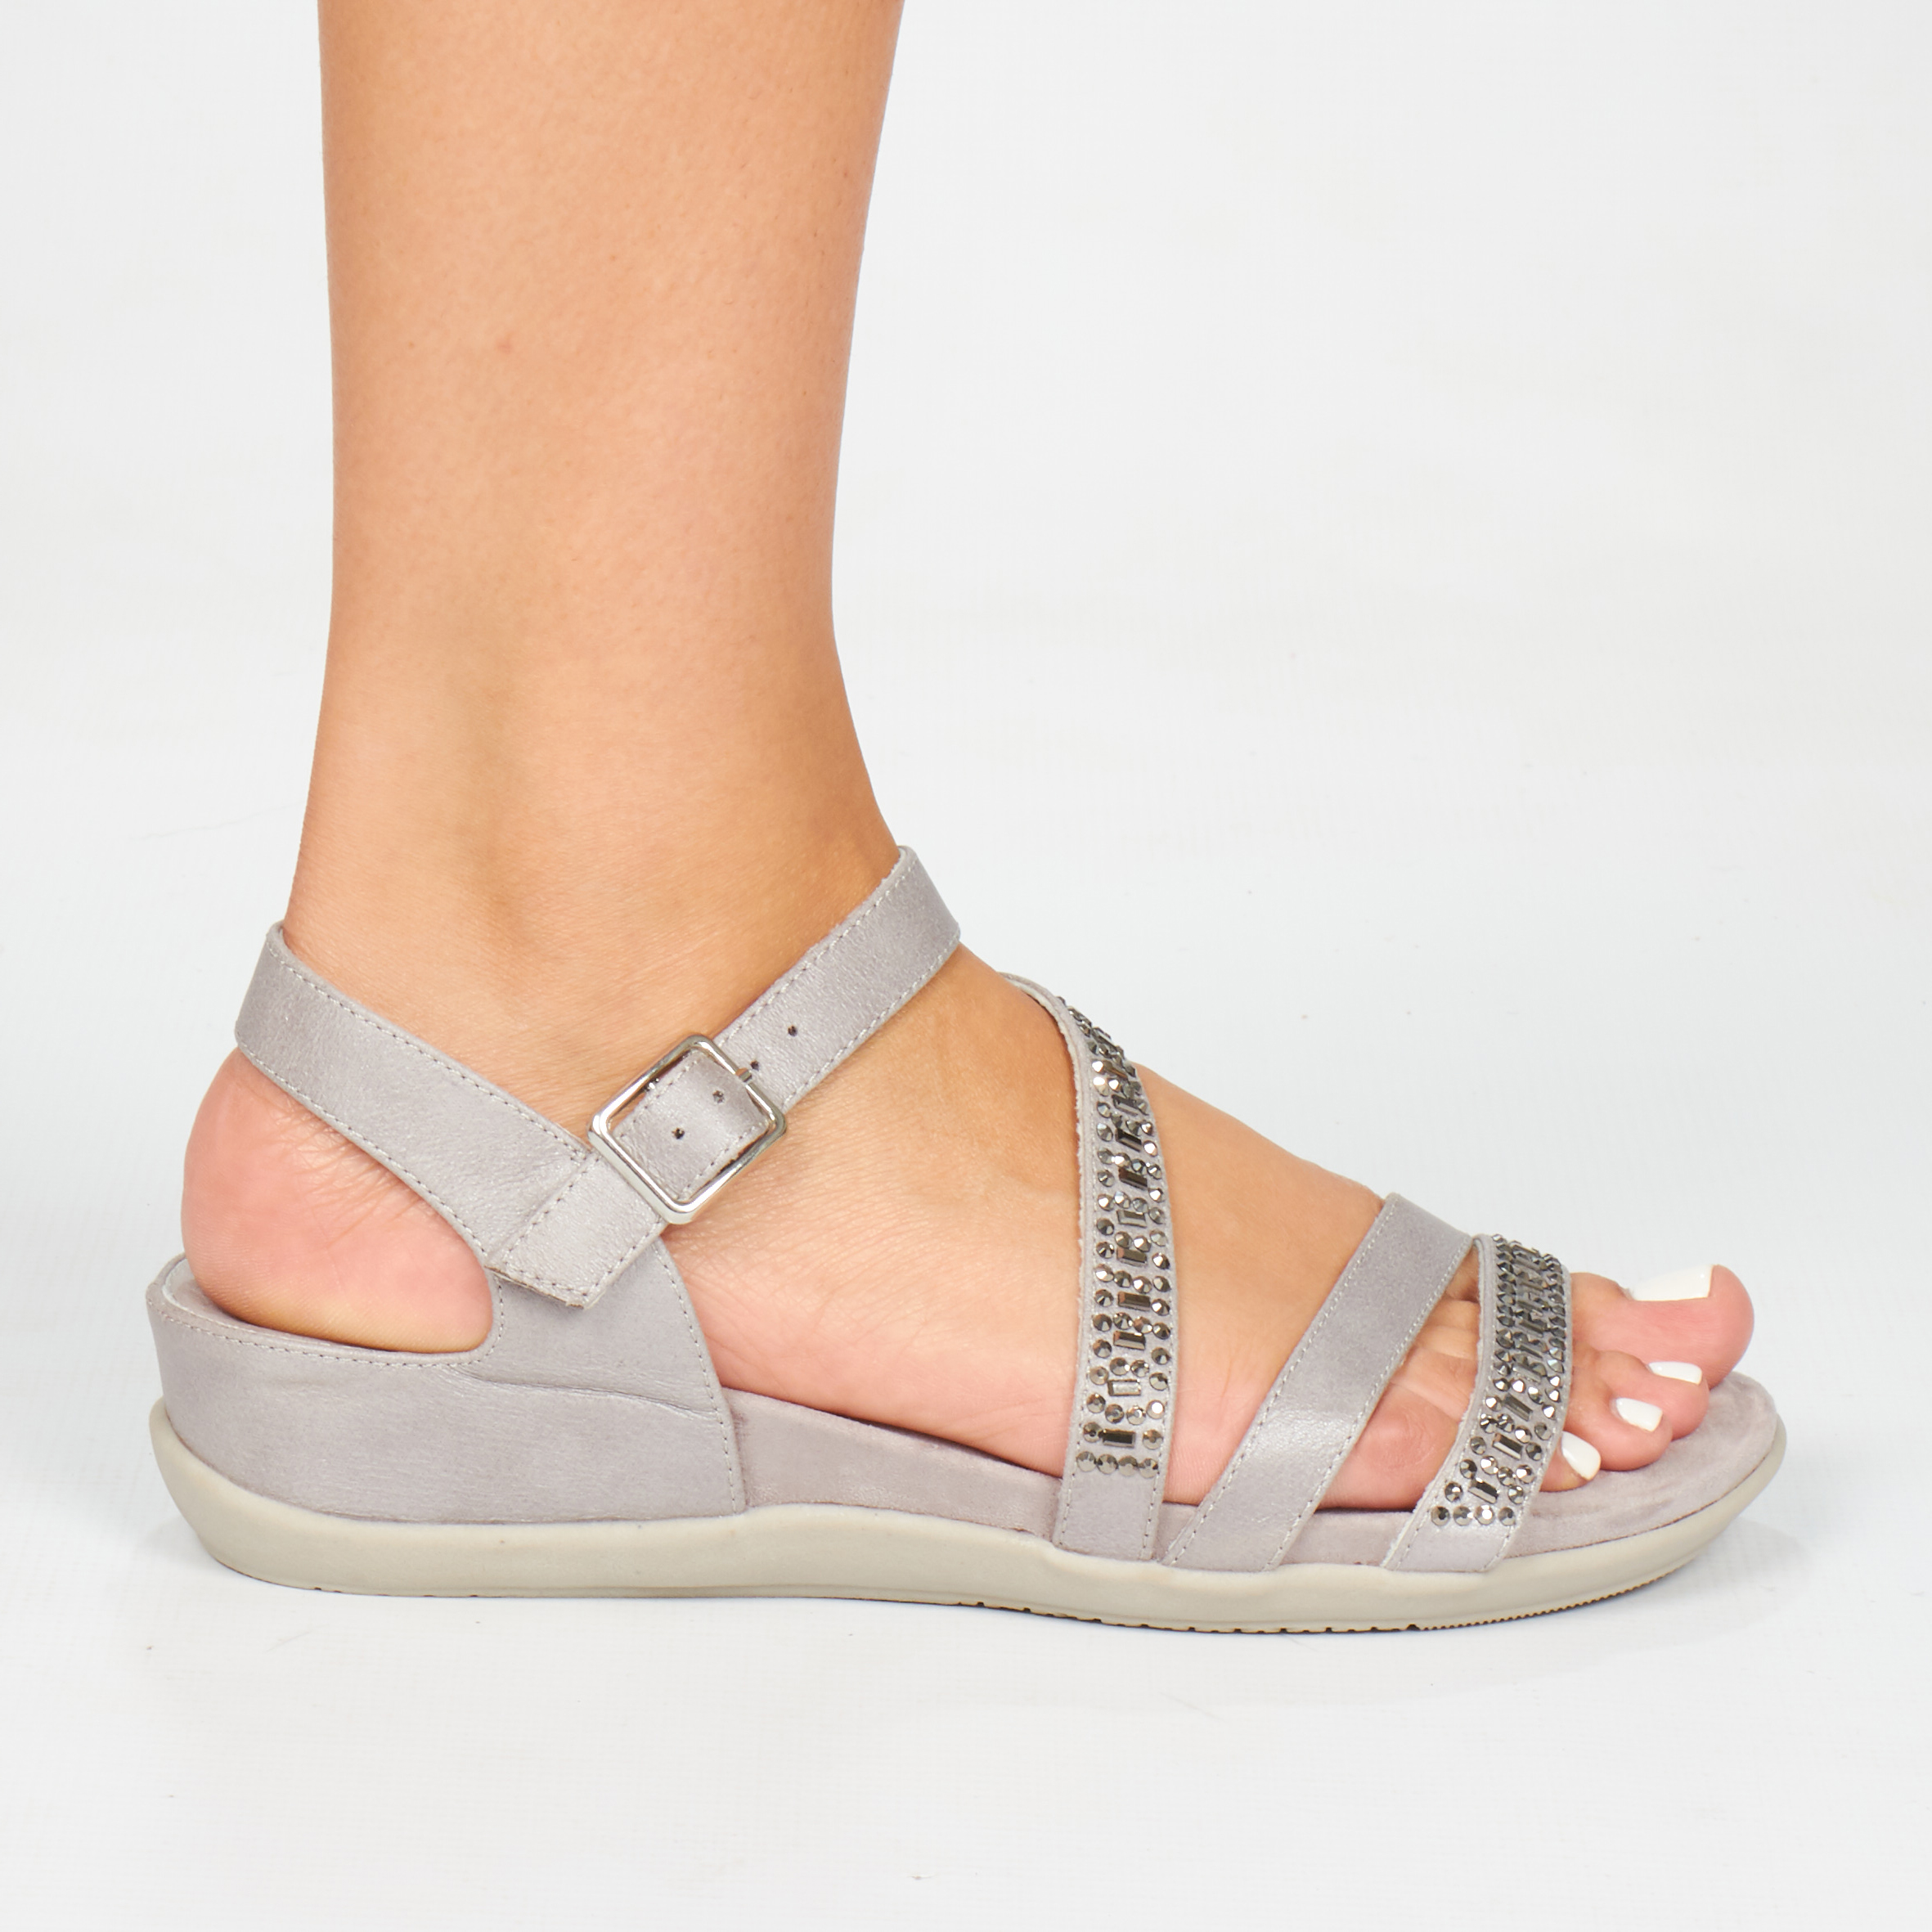 BUTTERFLY FEET GREY OLLIE2 SANDAL | Rosella - Style inspired by elegance